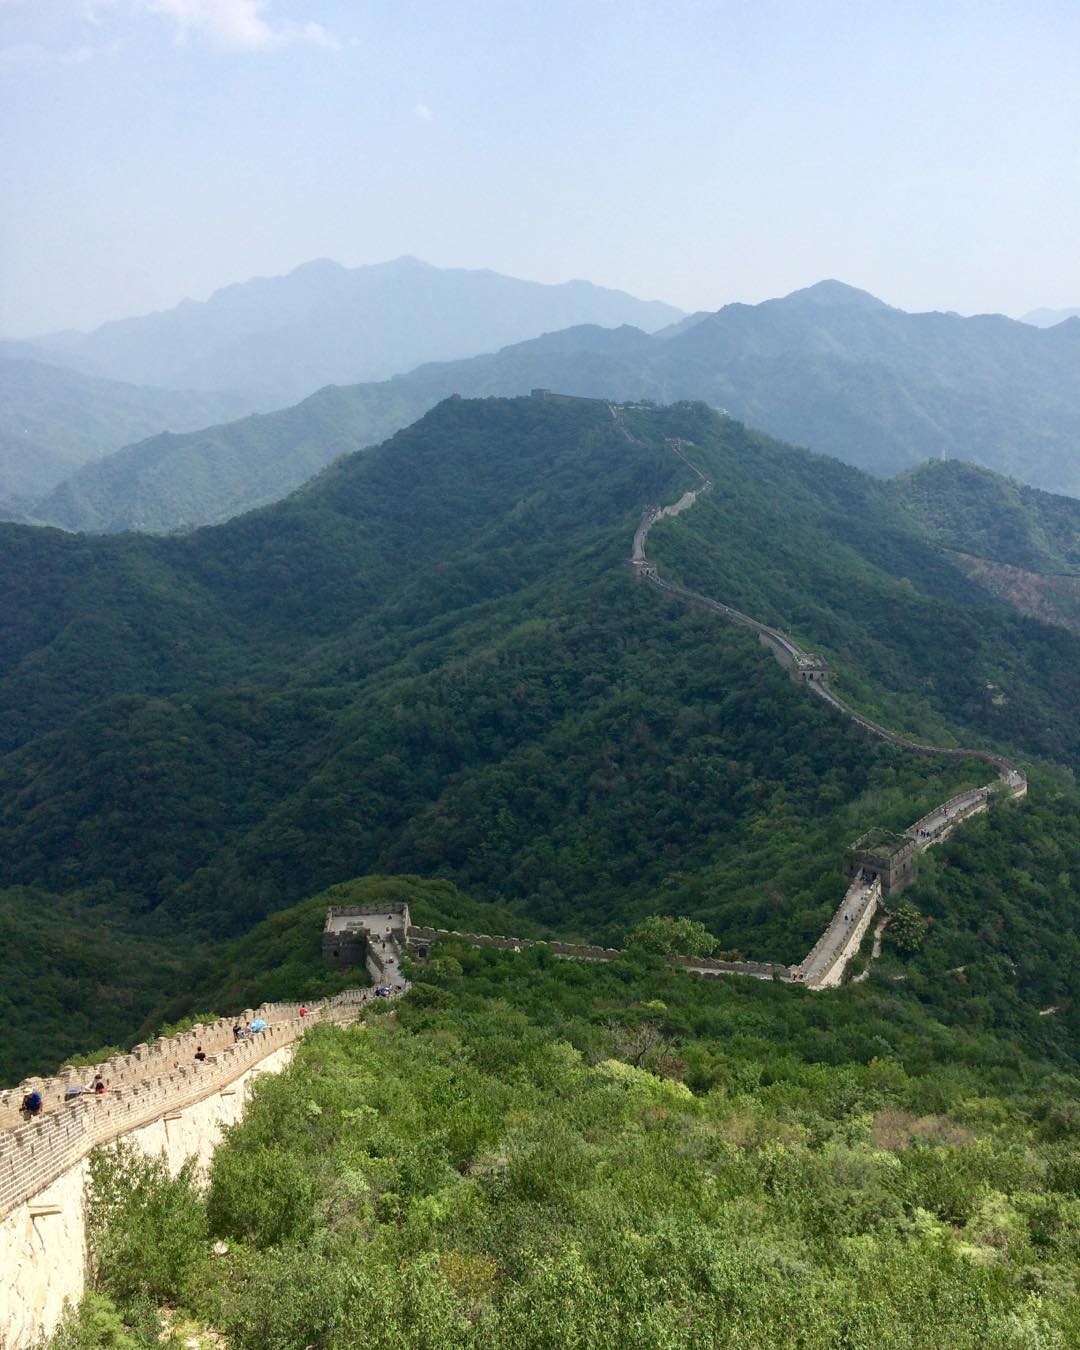 Great Wall of China, China 🇨🇳.
.
One of the wonders of the world. It can't be seen from space but it does seem to flow over the mountains forever.
.
#travel #china #beijing #greatwall #backpacking #greatwallofchina #traveller #explore #instatravel #adventure #wonderoftheworld #mutianyu #travelgram #thegreatwallofchina #china🇨🇳 #travelholic #backpacker #travelphotography #traveling #wondersoftheworld #chinatrip